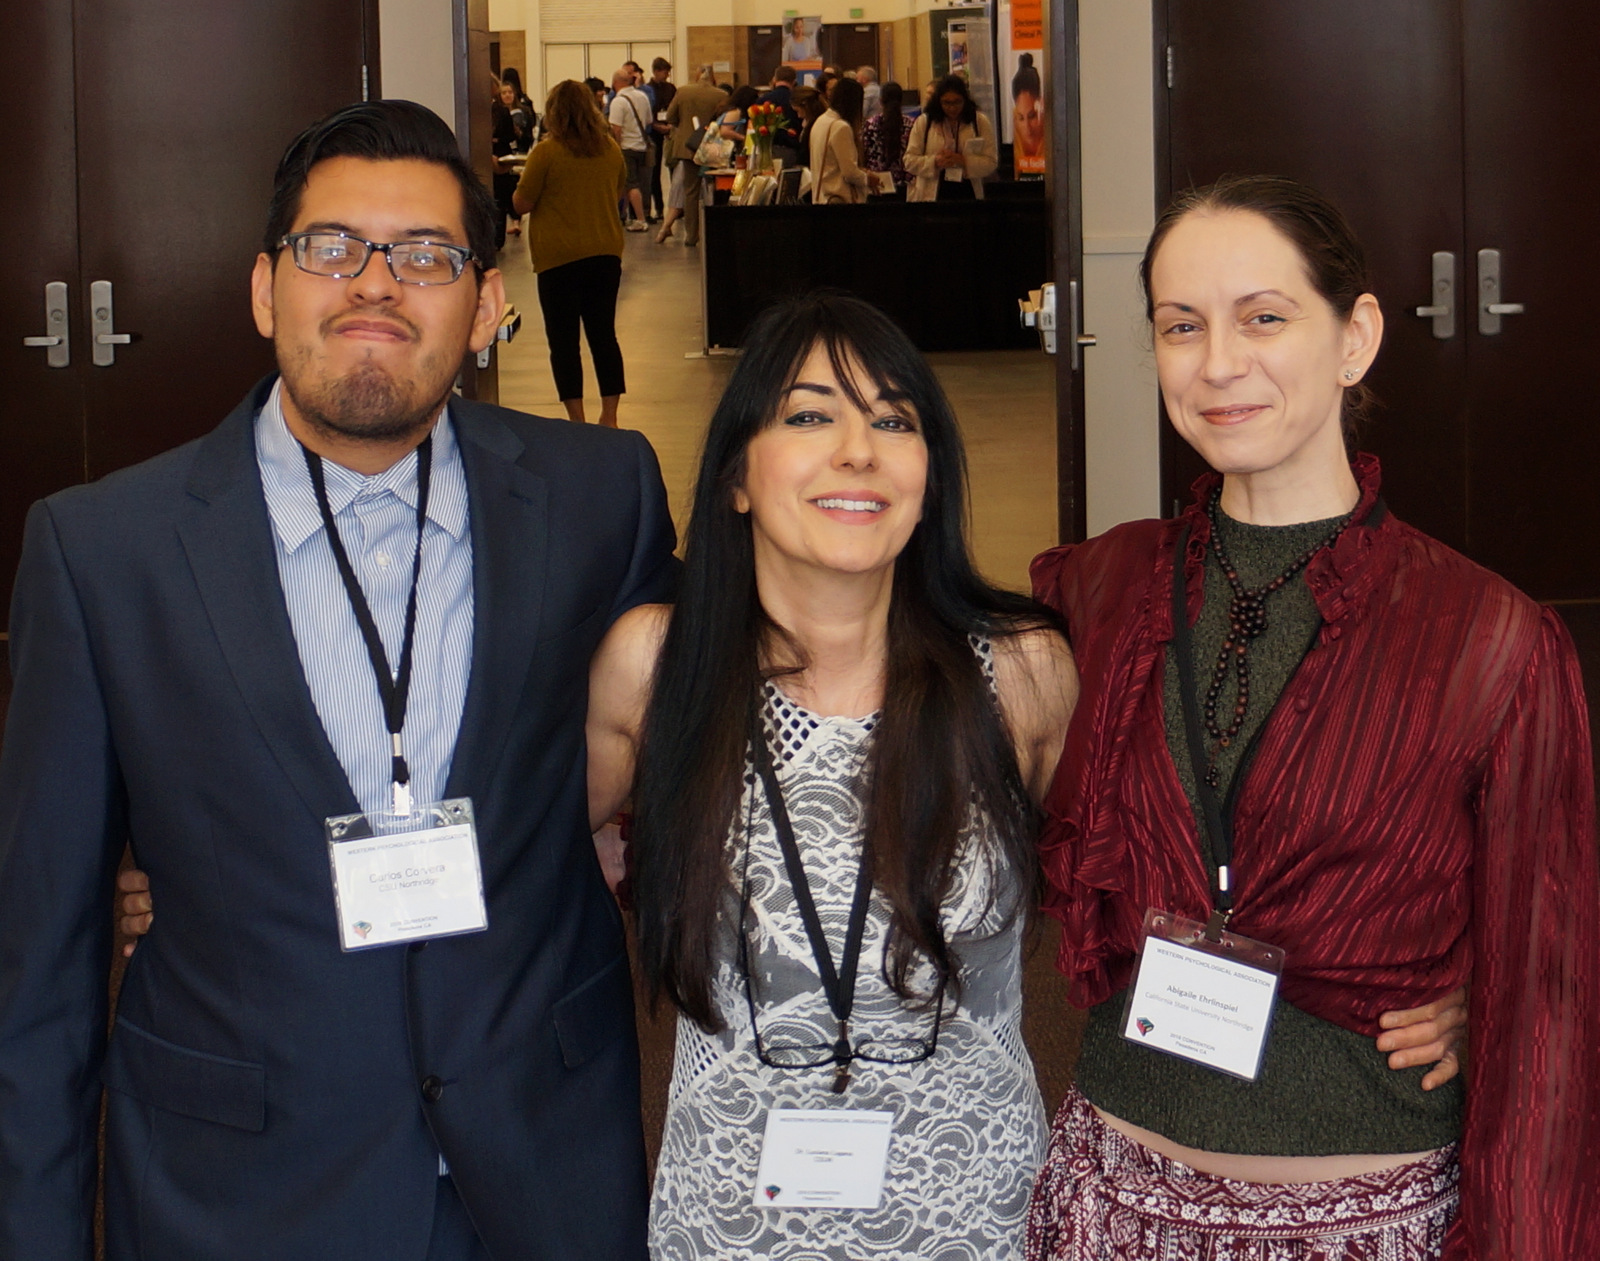 Csun Professor Dr Luciana Lagana Presented 3 Research Posters With Her Research Assistants At 